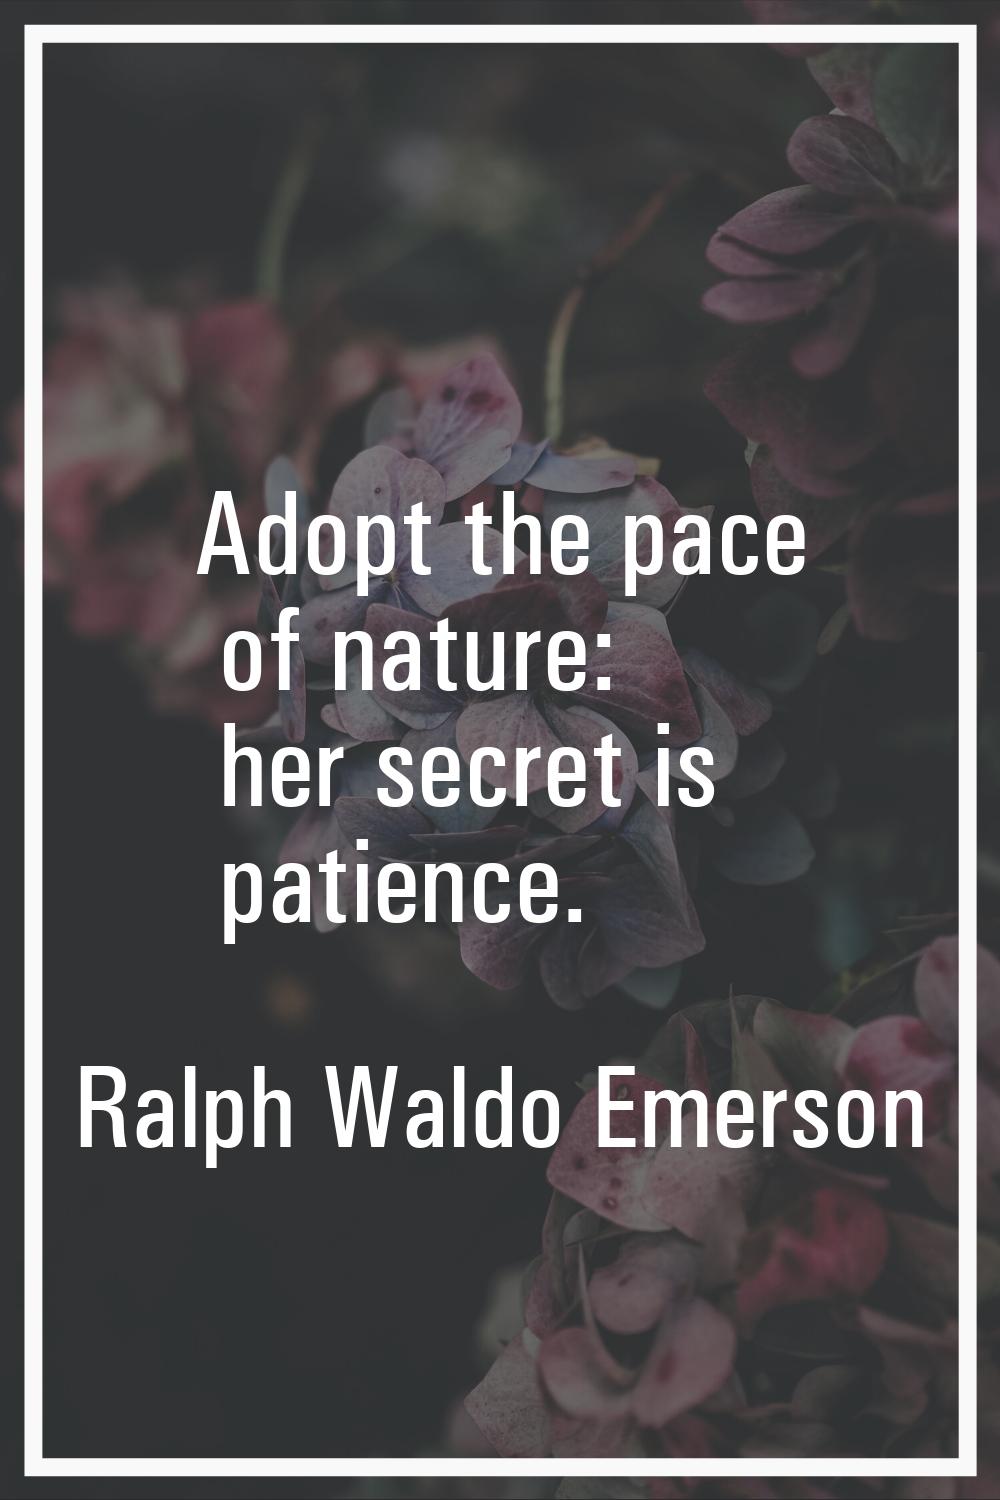 Adopt the pace of nature: her secret is patience.